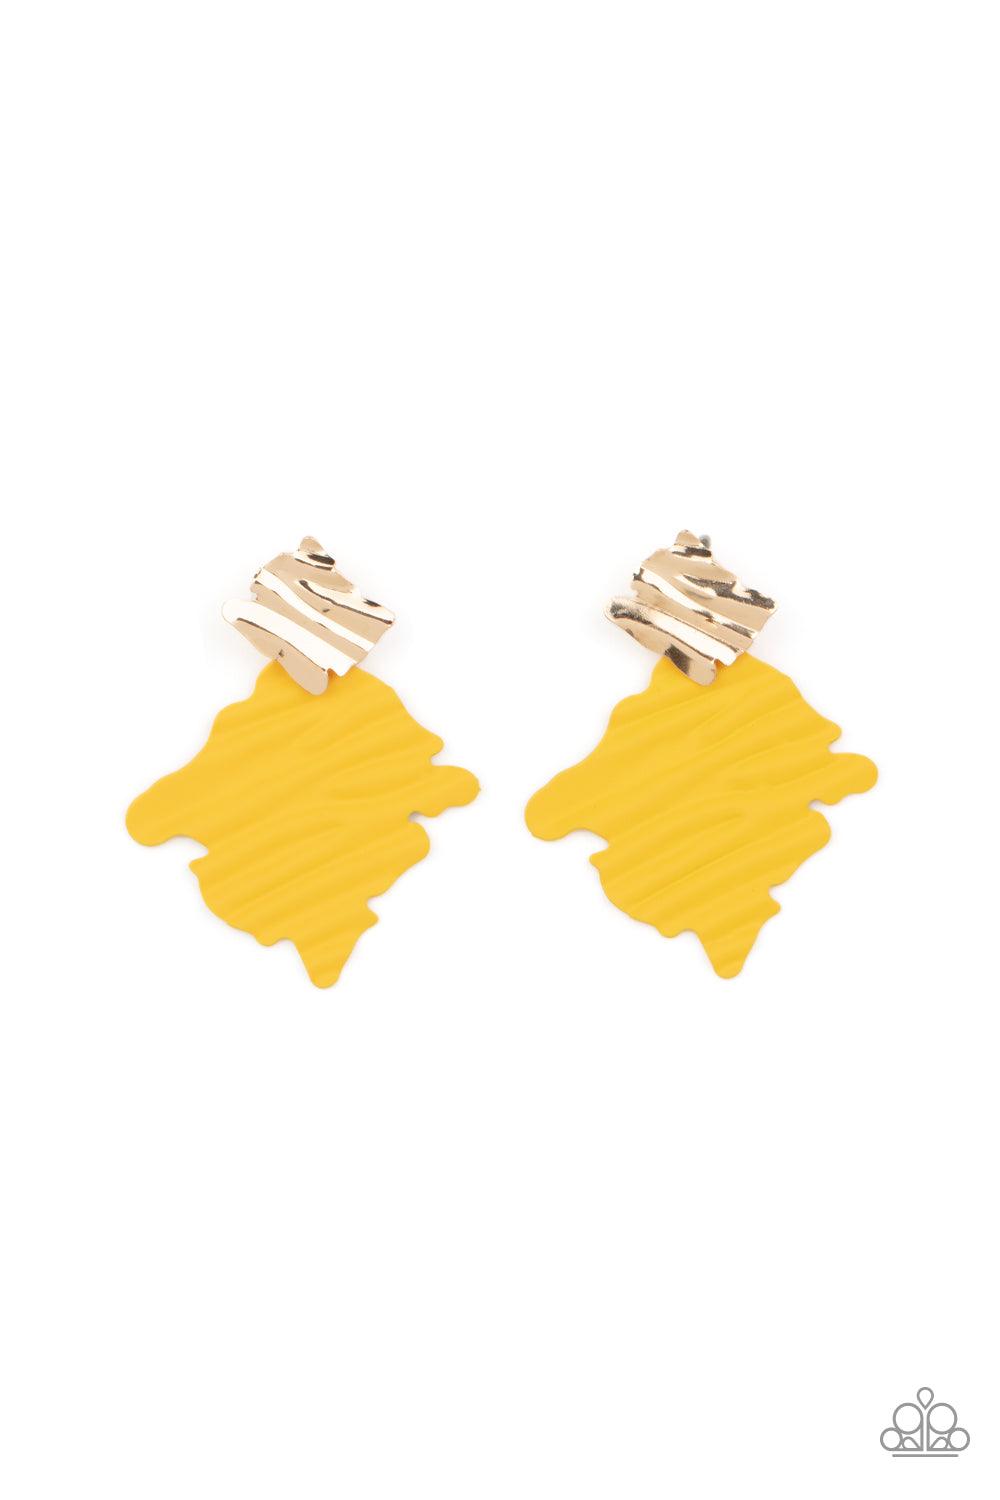 Paparazzi Accessories Crimped Couture - Yellow Painted in a rustic finish, a rippling Mustard frame links to a dainty gold frame featuring crimped texture, resulting in a modern lure. Earring attaches to a standard post fitting. Sold as one pair of post e